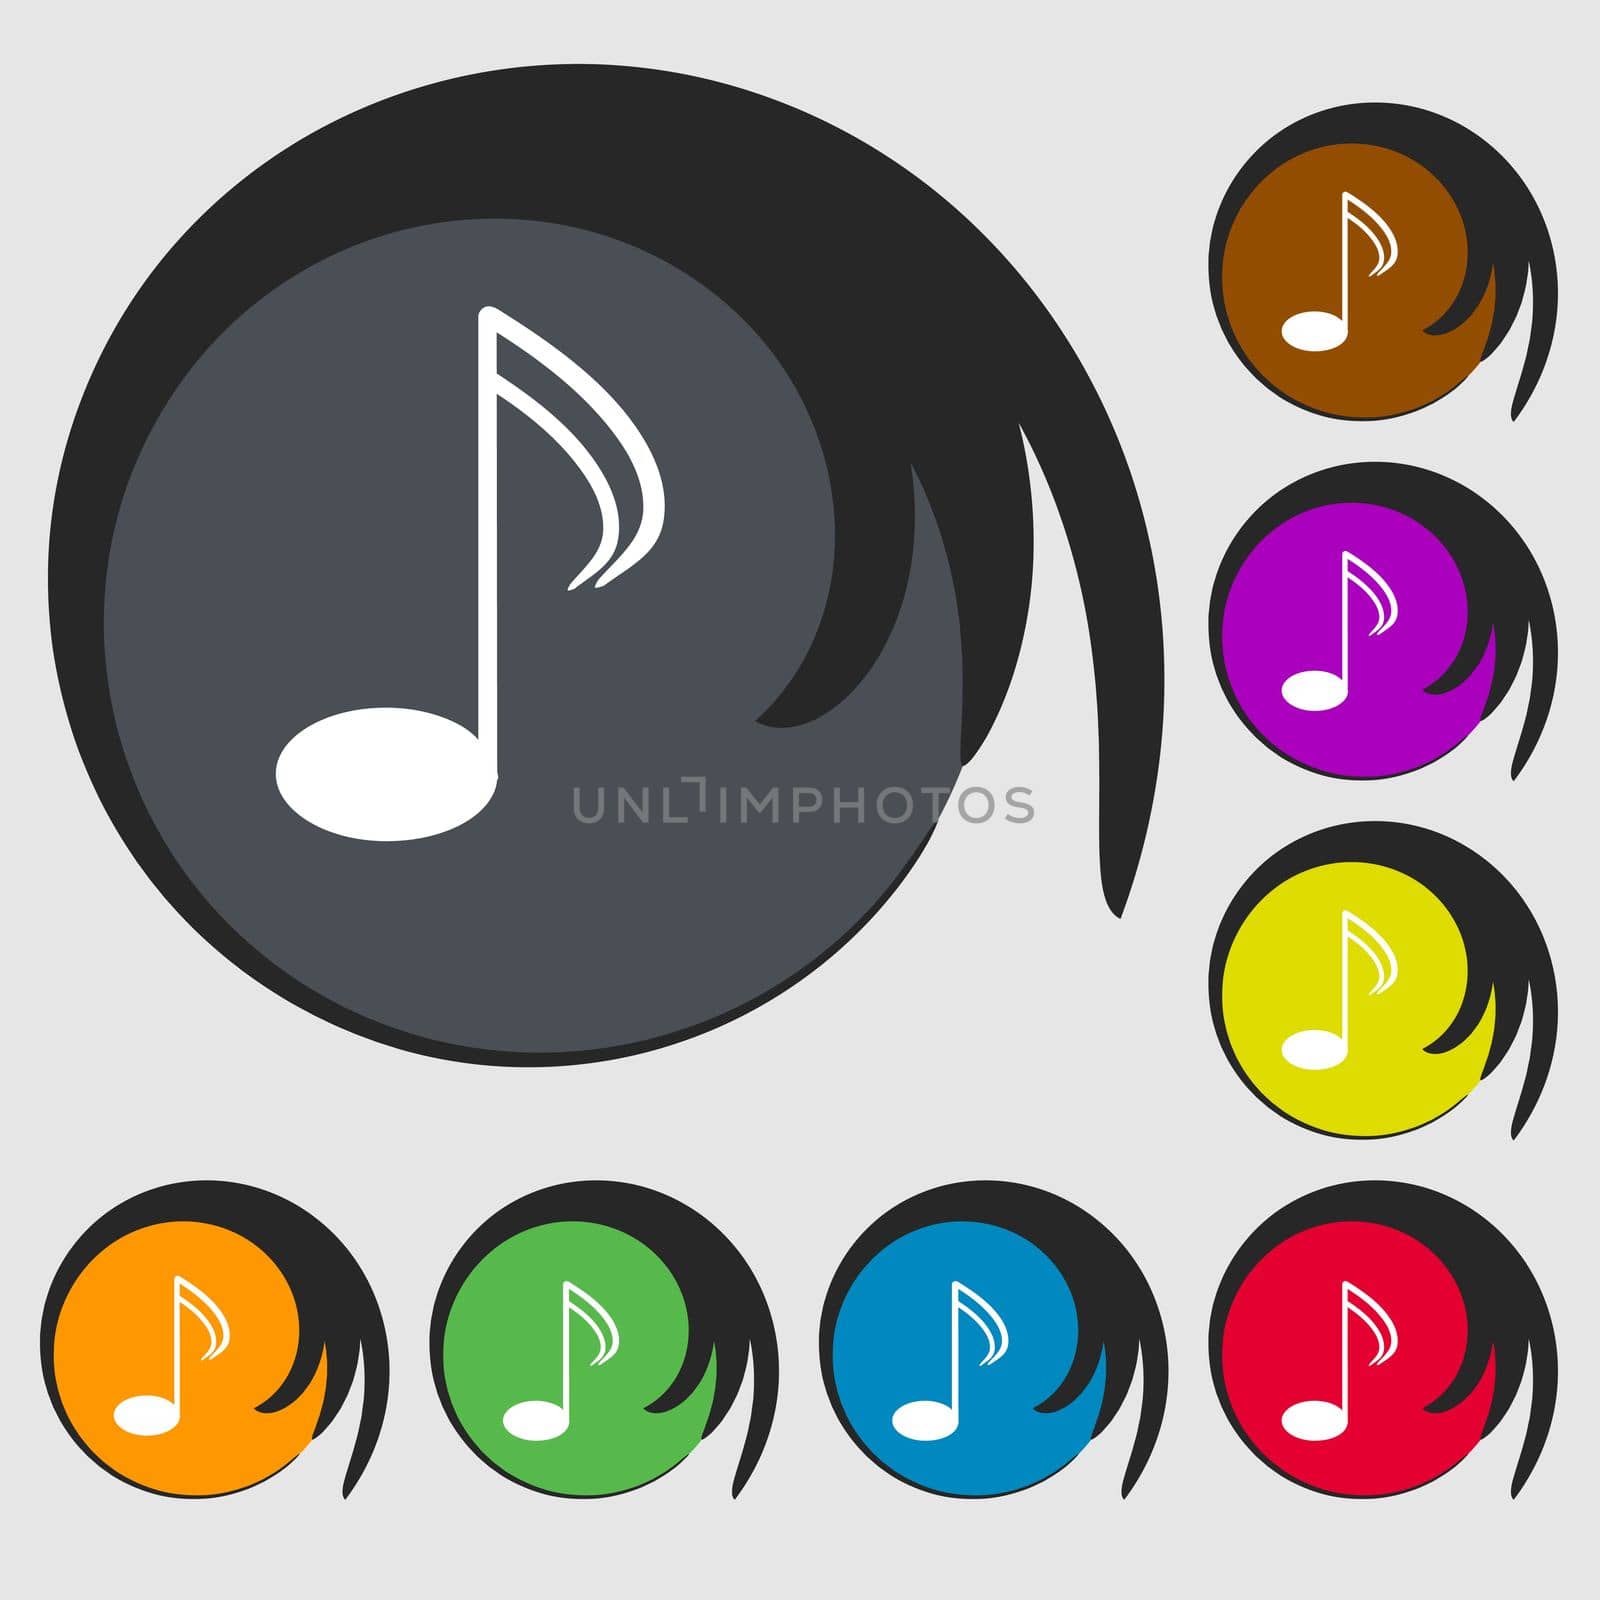 Music note sign icon. Musical symbol. Symbols on eight colored buttons. illustration